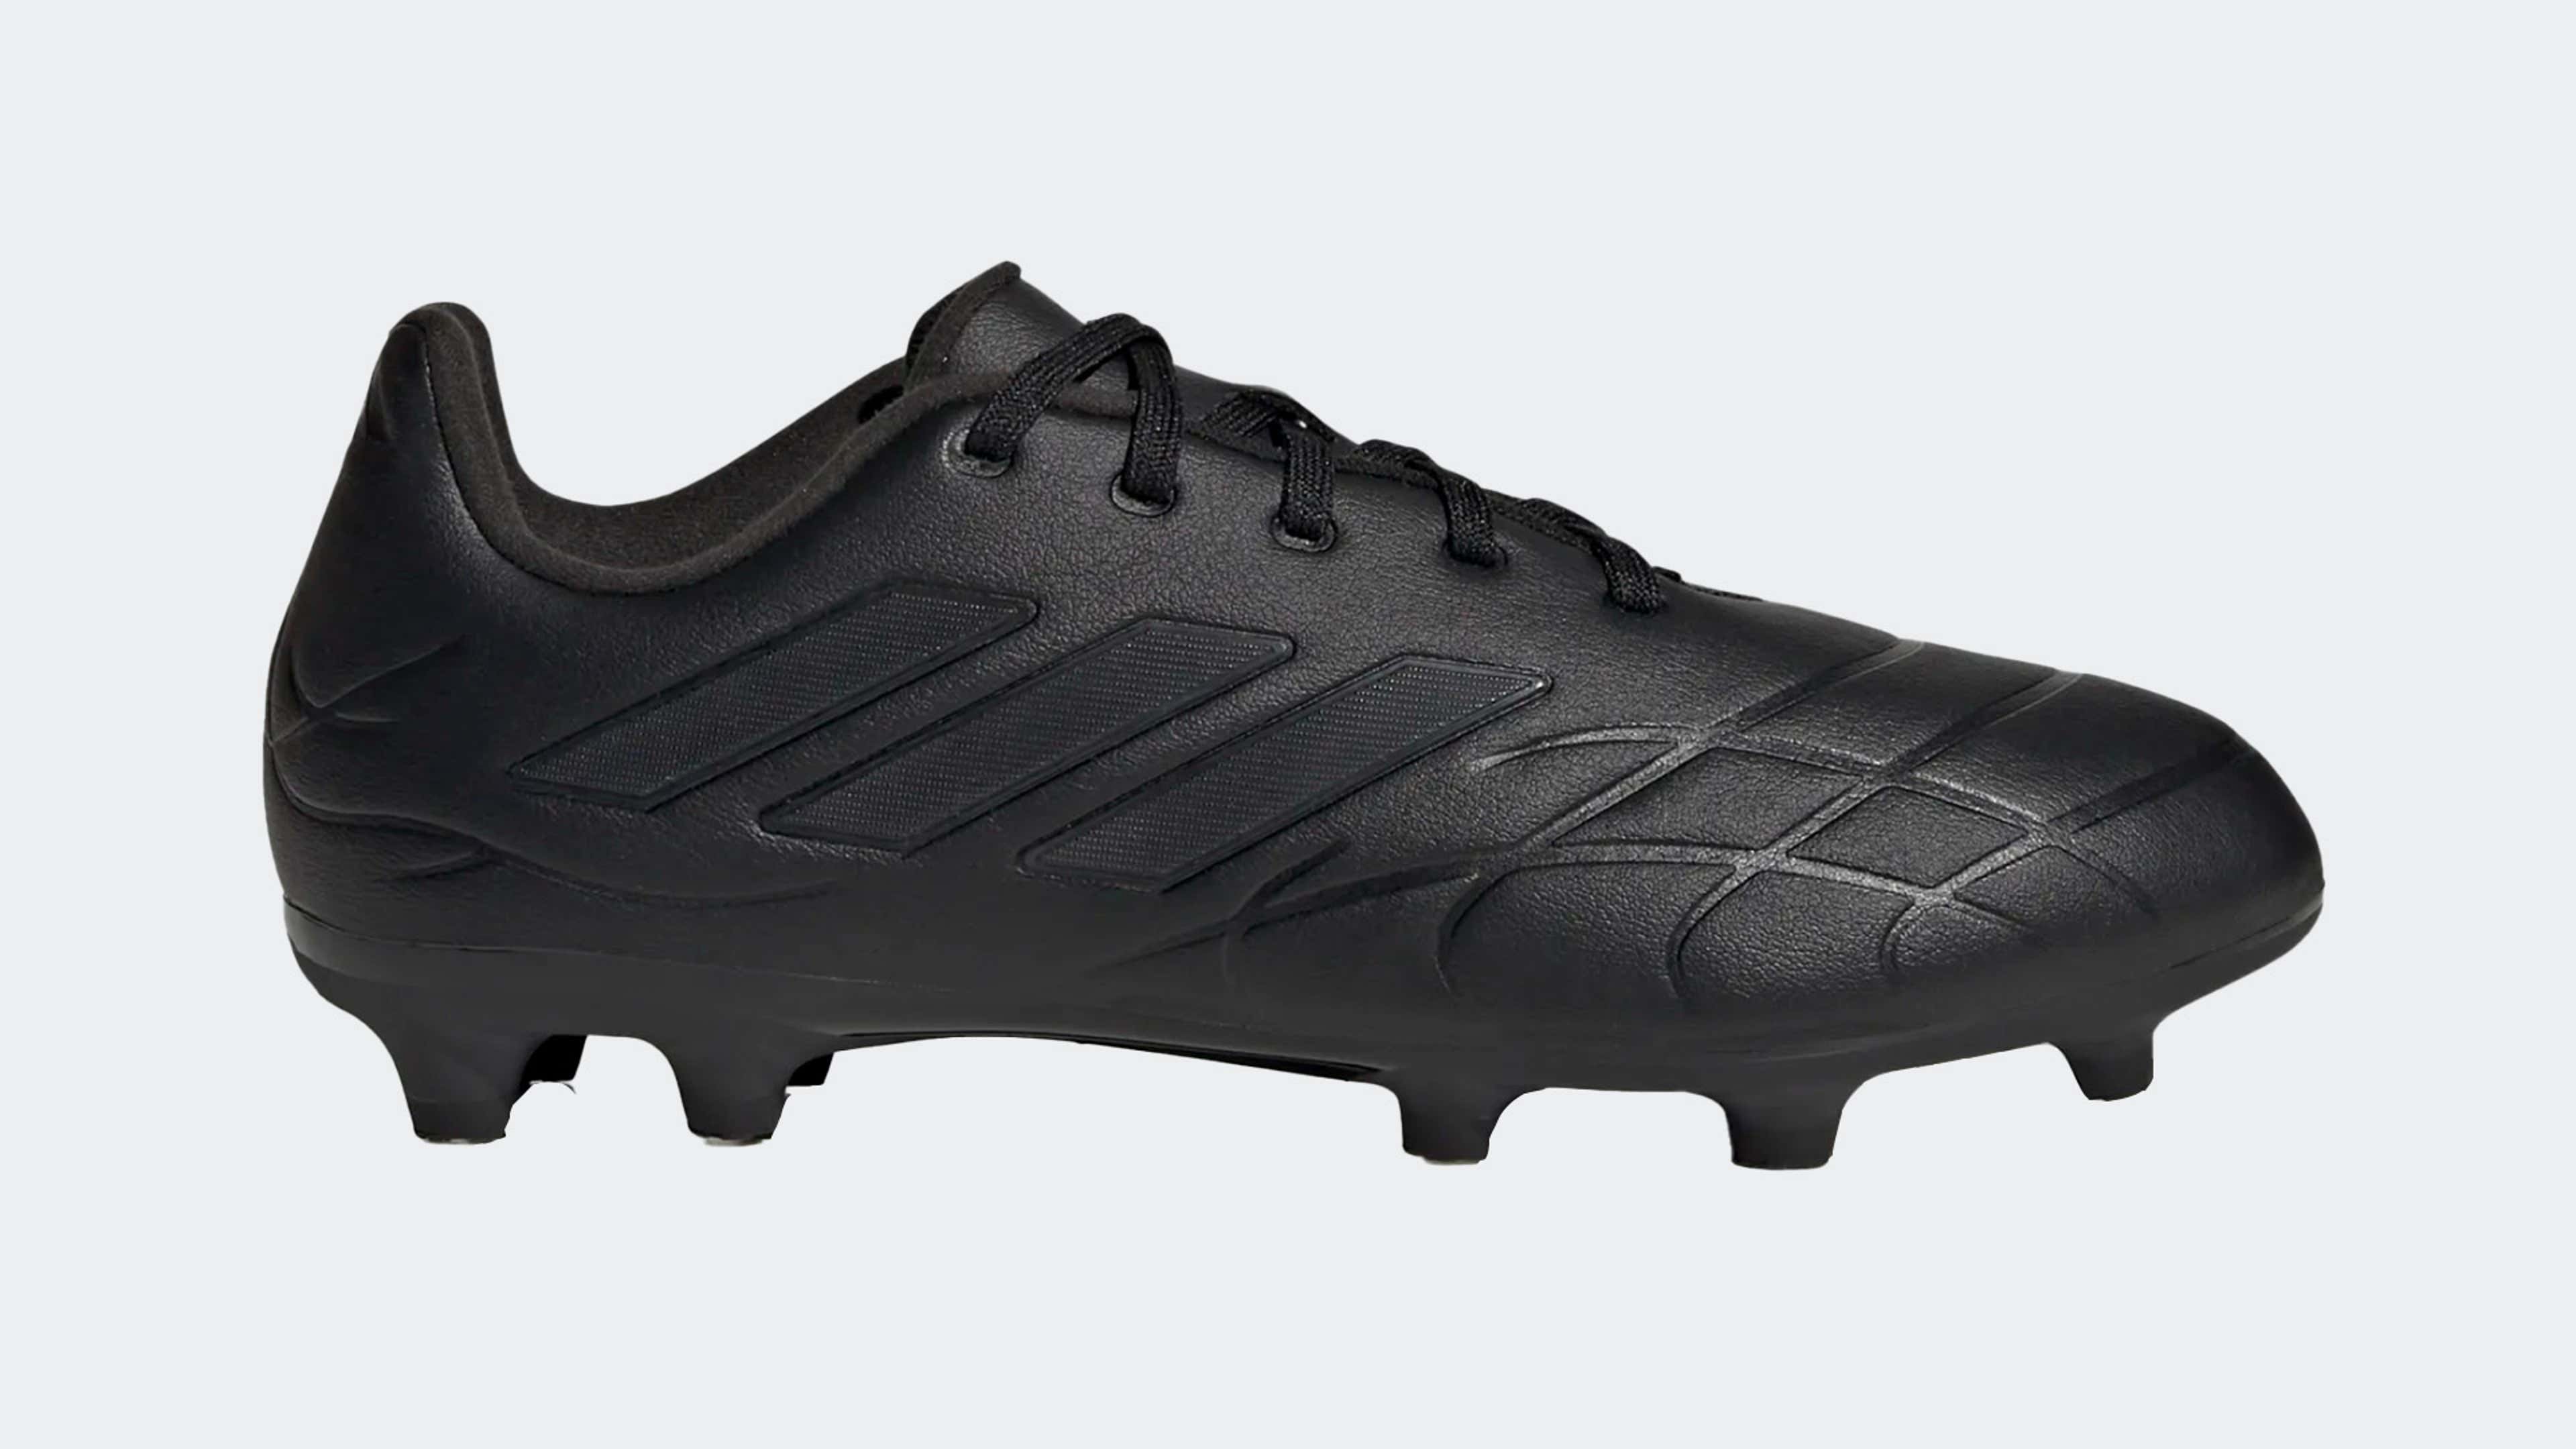 The best boots for kids in | Goal.com